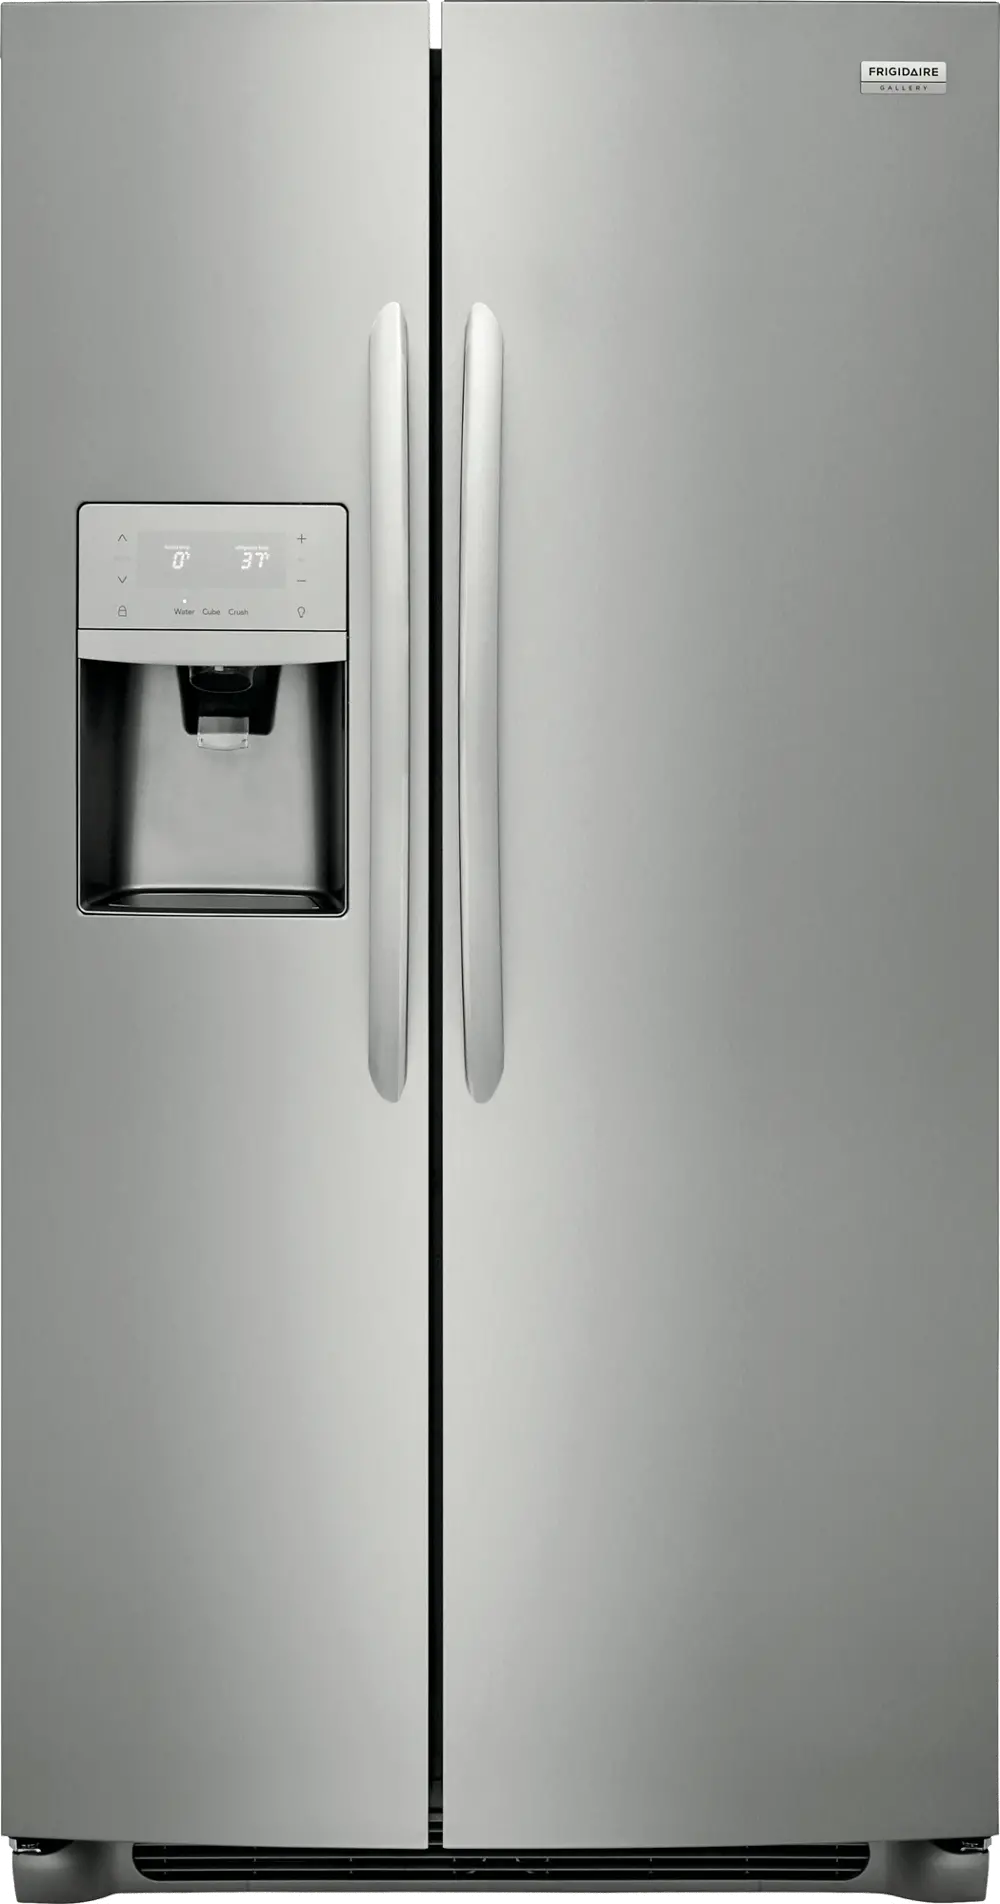 DGHX2355TF Frigidaire Gallery 22.2 cu. ft. Side by Side Refrigerator - 33 Inch Stainless Steel-1